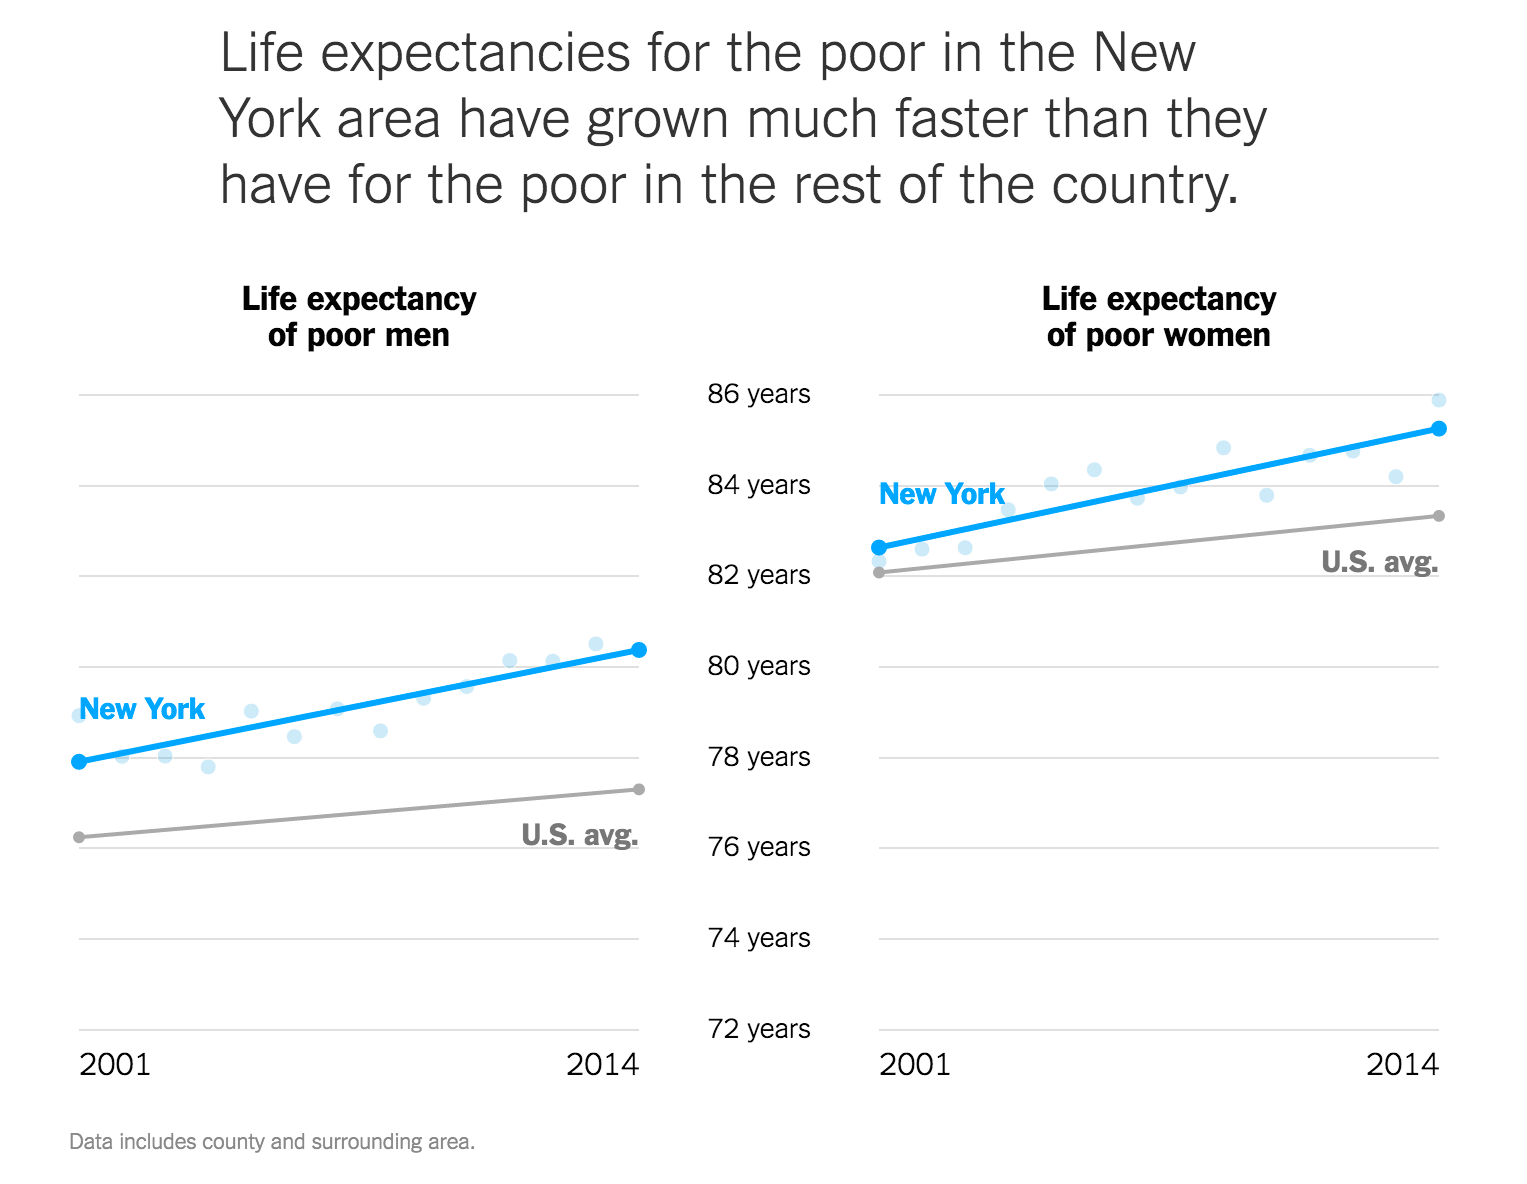 Where the Poor Live Longer: How Your Area Compares